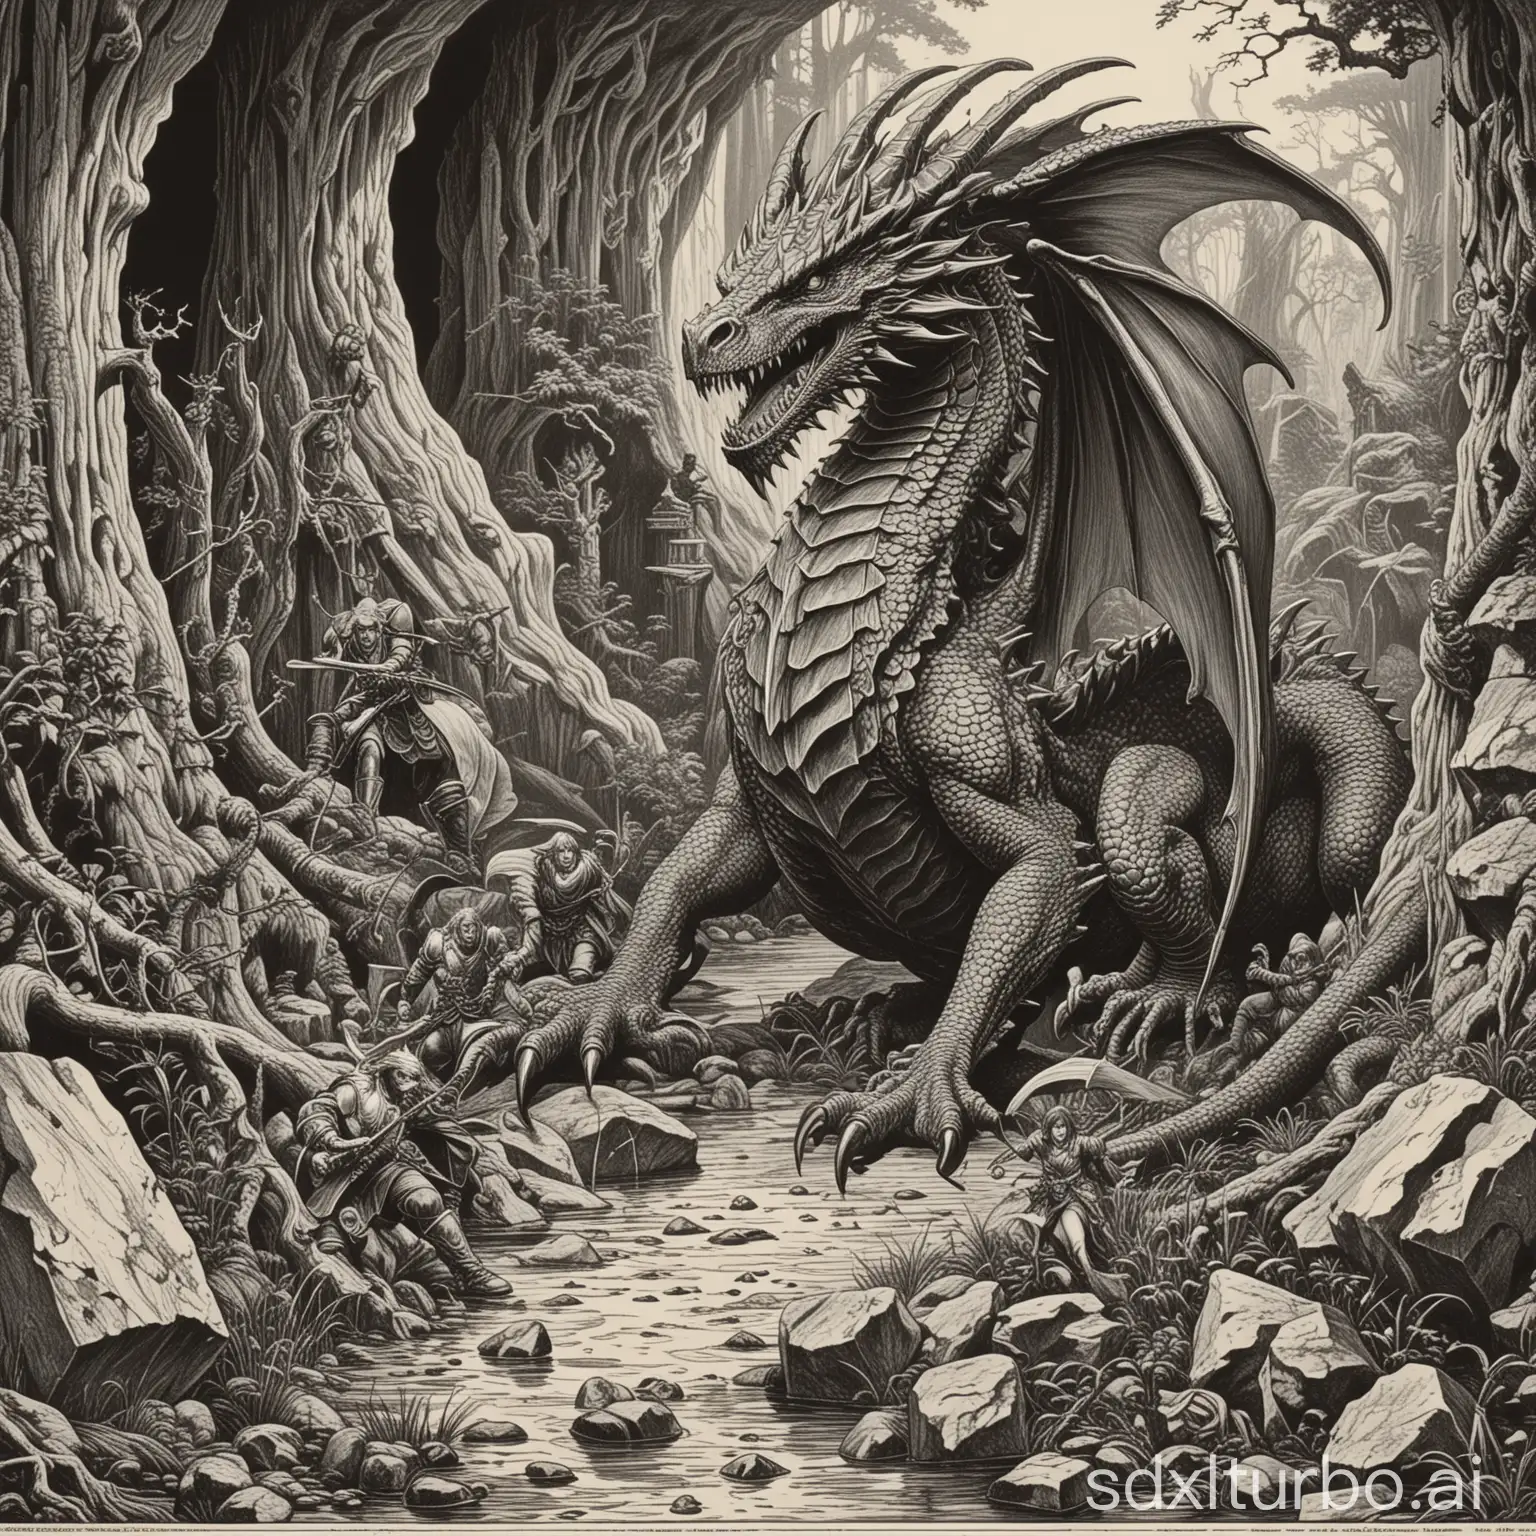 style of 1978 dungeons and dragons, by Larry Elmore, white background, 1bit bw, woodcut, a dragon on its hoard,